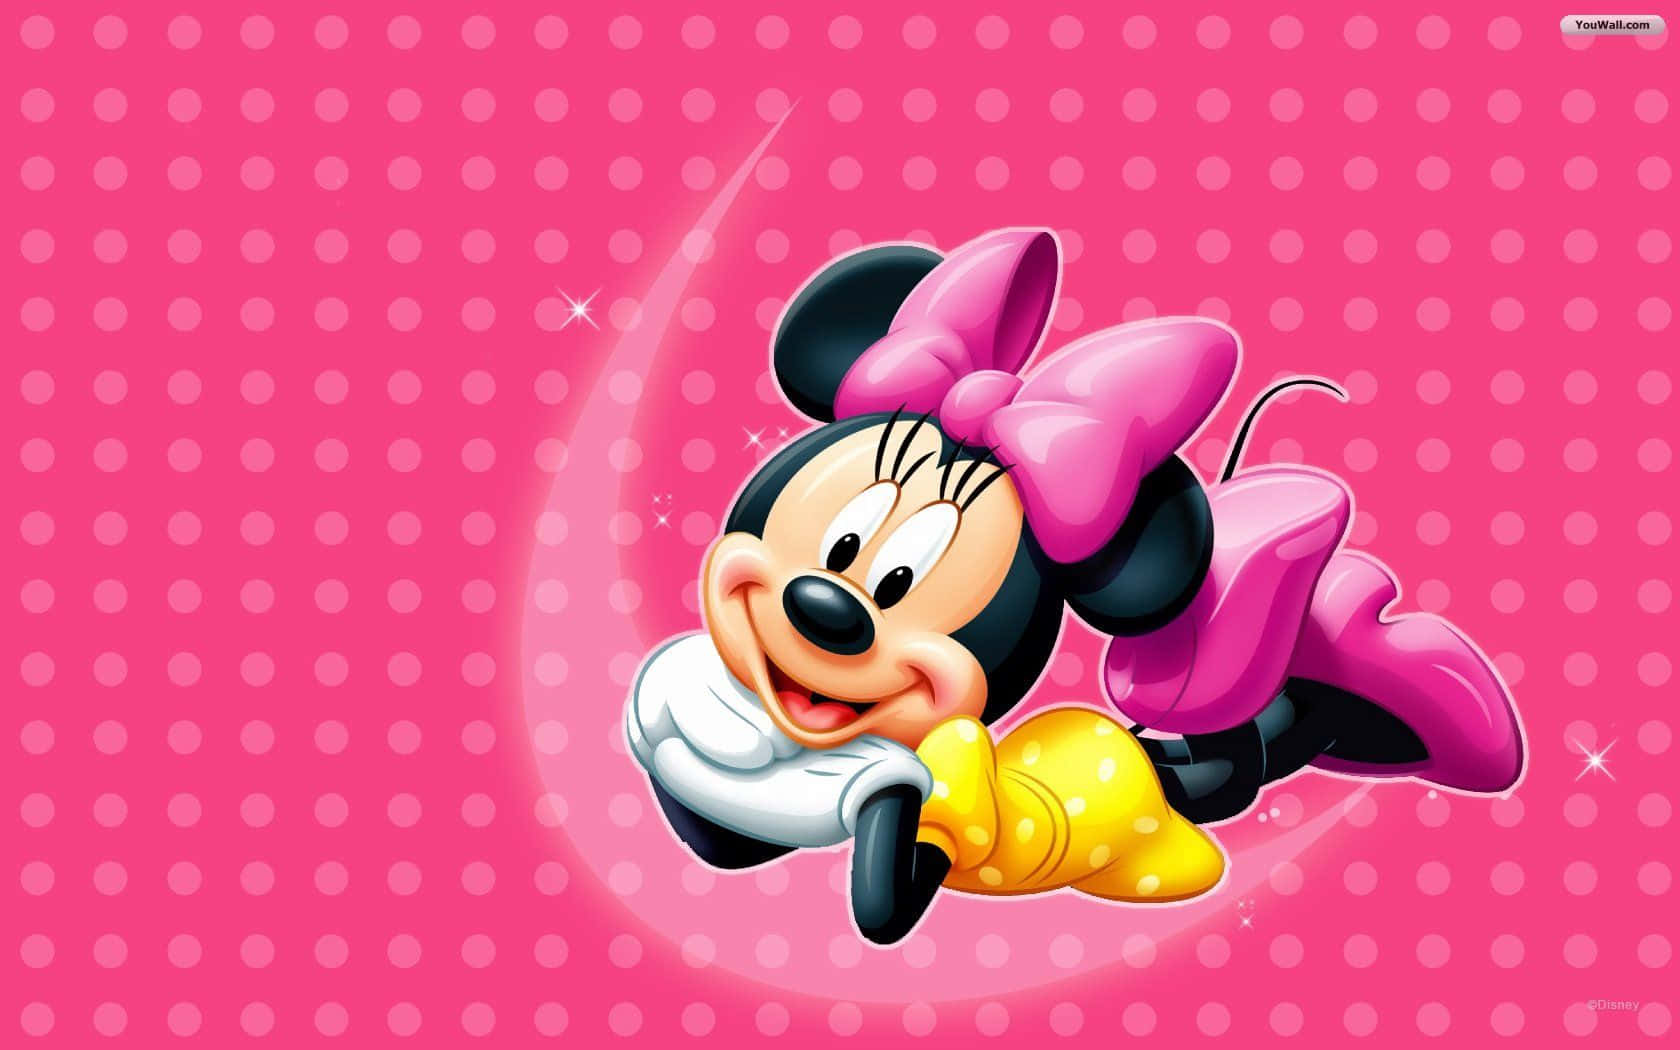 100+] Minnie Mouse Pink Wallpapers